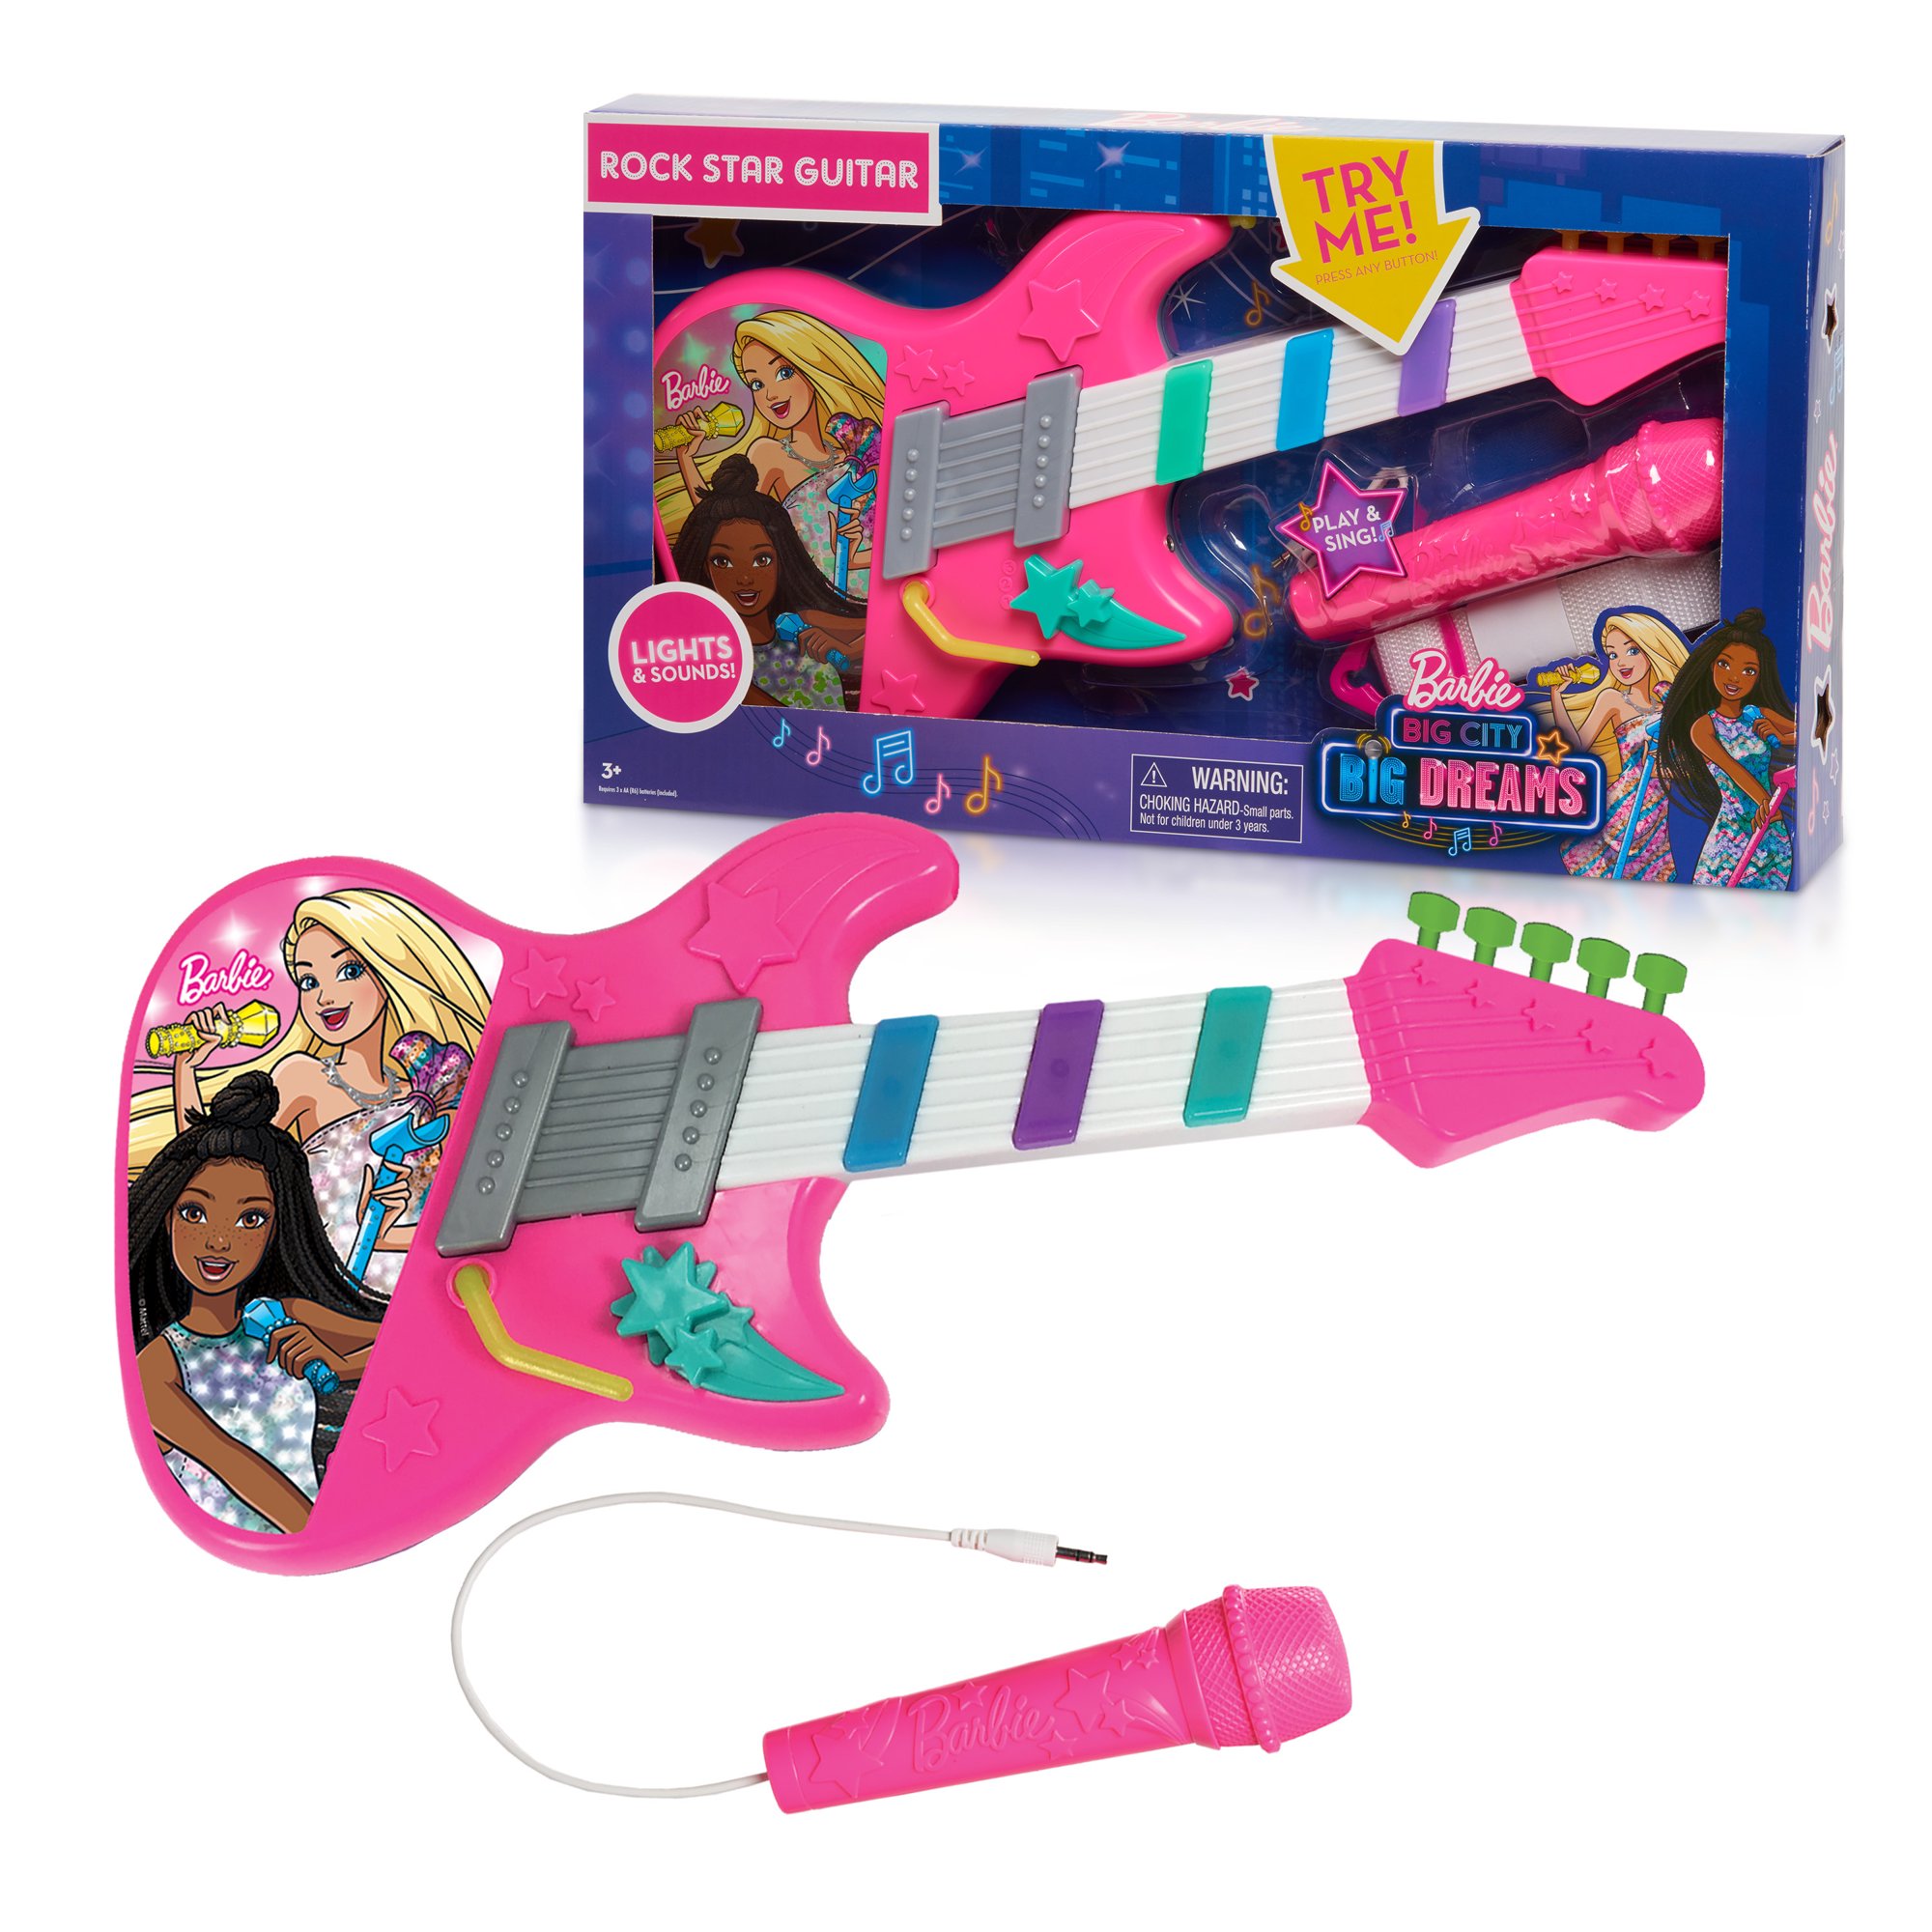 Just Play Barbie Rock Star Kids' Toy Guitar w/ Lights, Sounds & Microphone $10 + Free Store Pickup at Walmart, FS w/ Walmart+ or FS on $35+